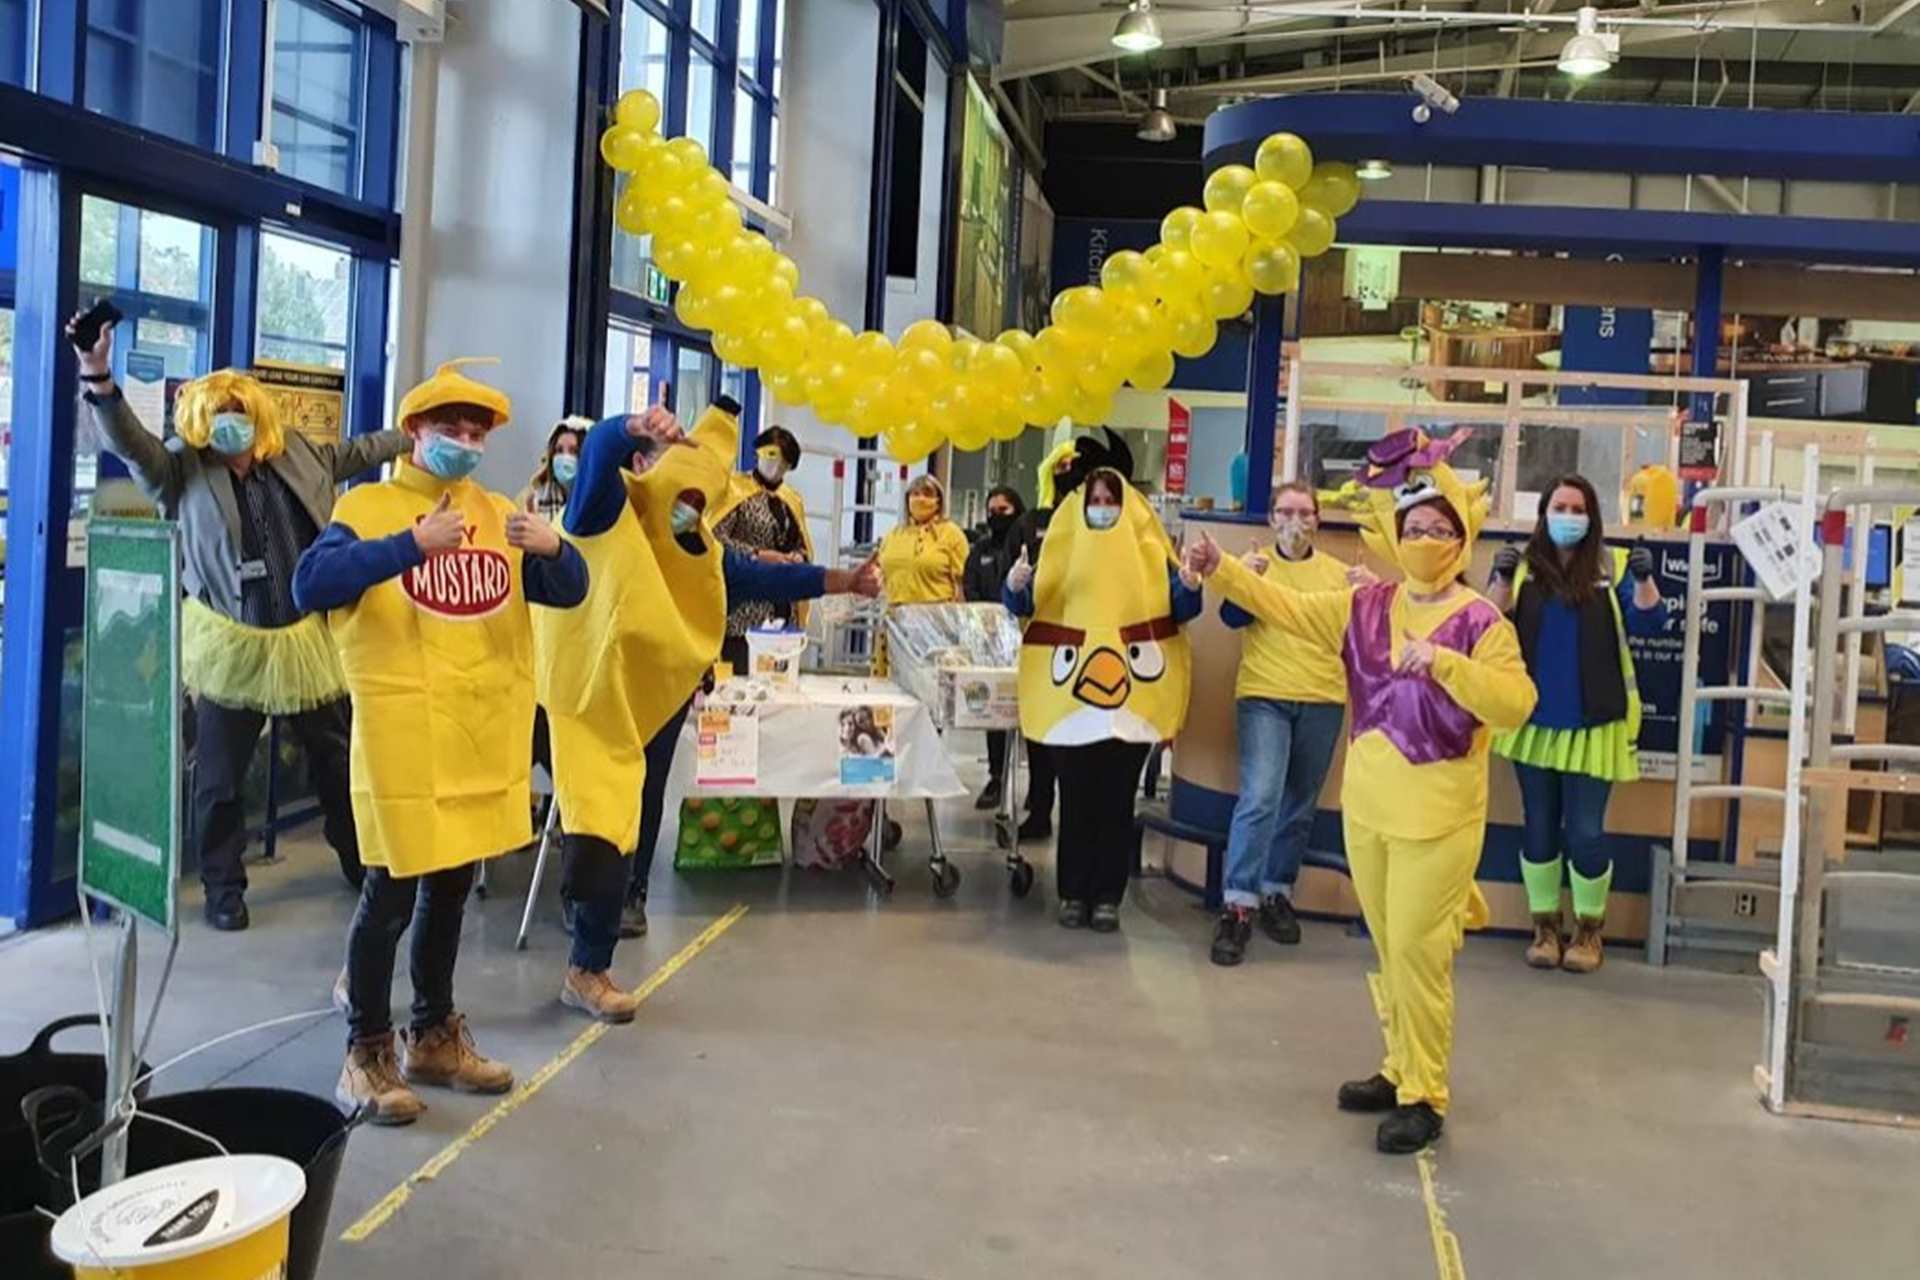 Members of staff from the Wickes branch in Newcastle are dressed up in yellow clothes and fancy dress outfits including a banana, a yellow bird, and mustard. They all standing round a table with their thumbs up facing the camera.